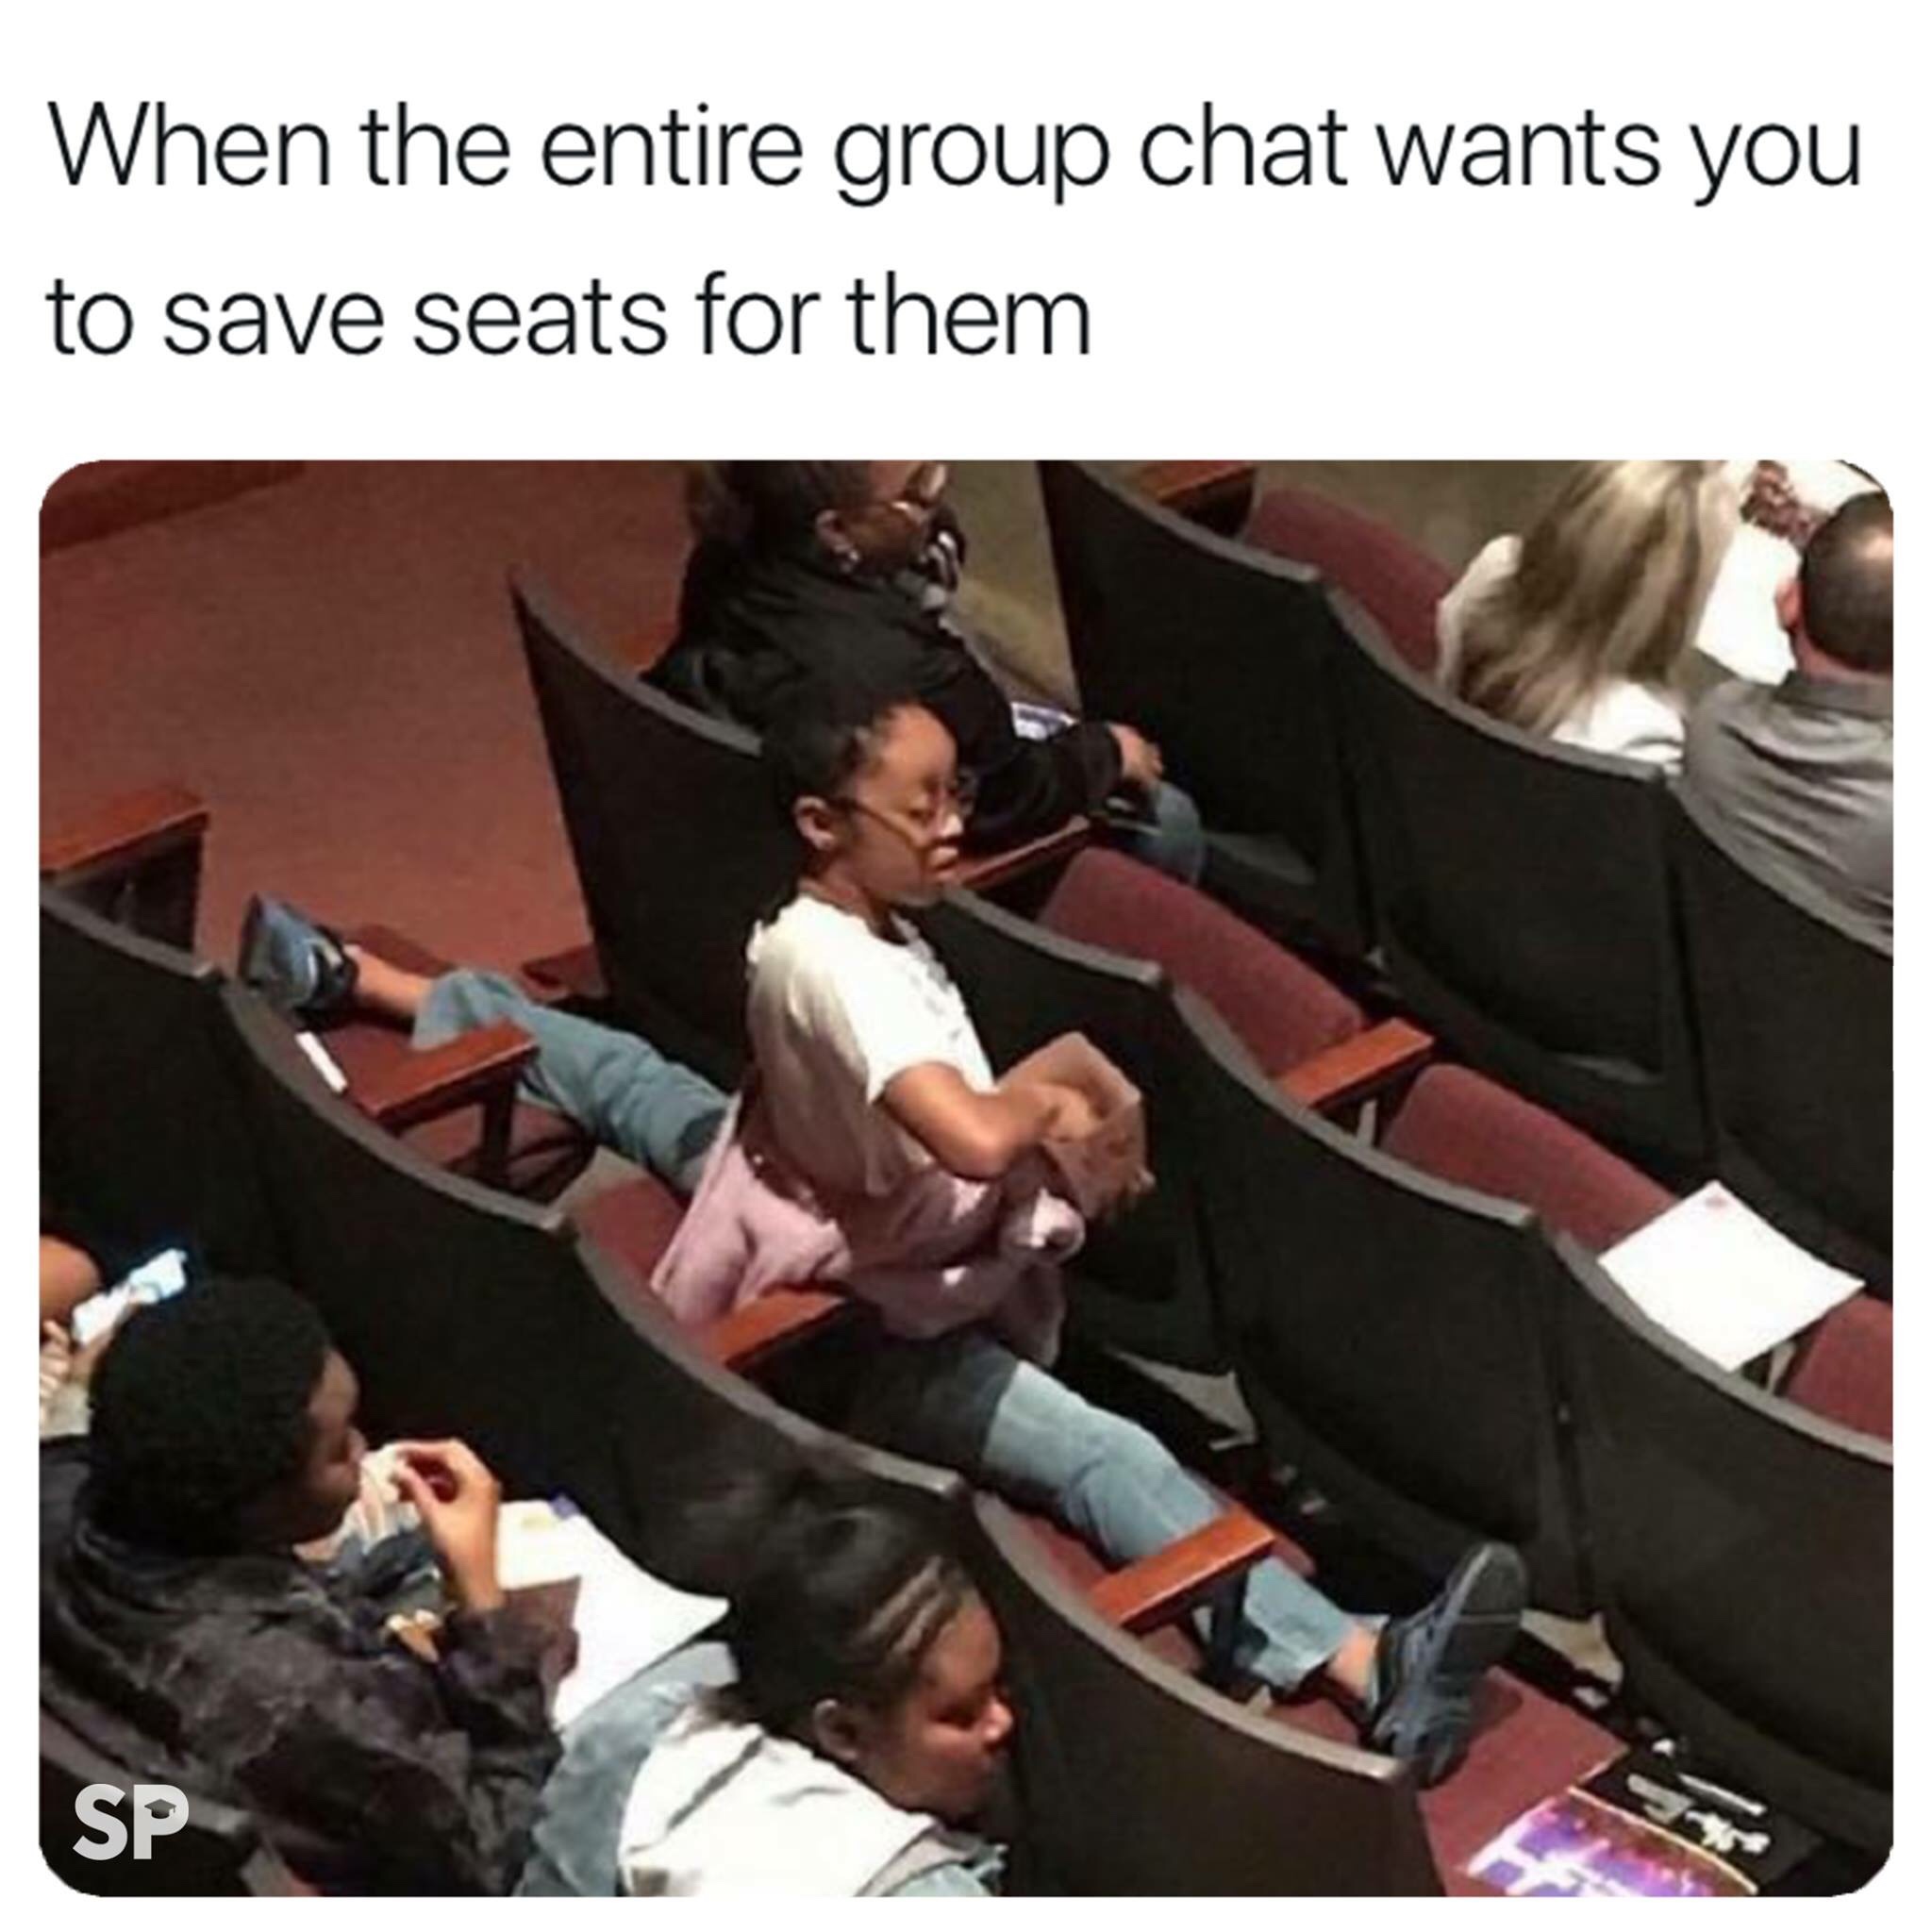 save seats meme - When the entire group chat wants you to save seats for th...